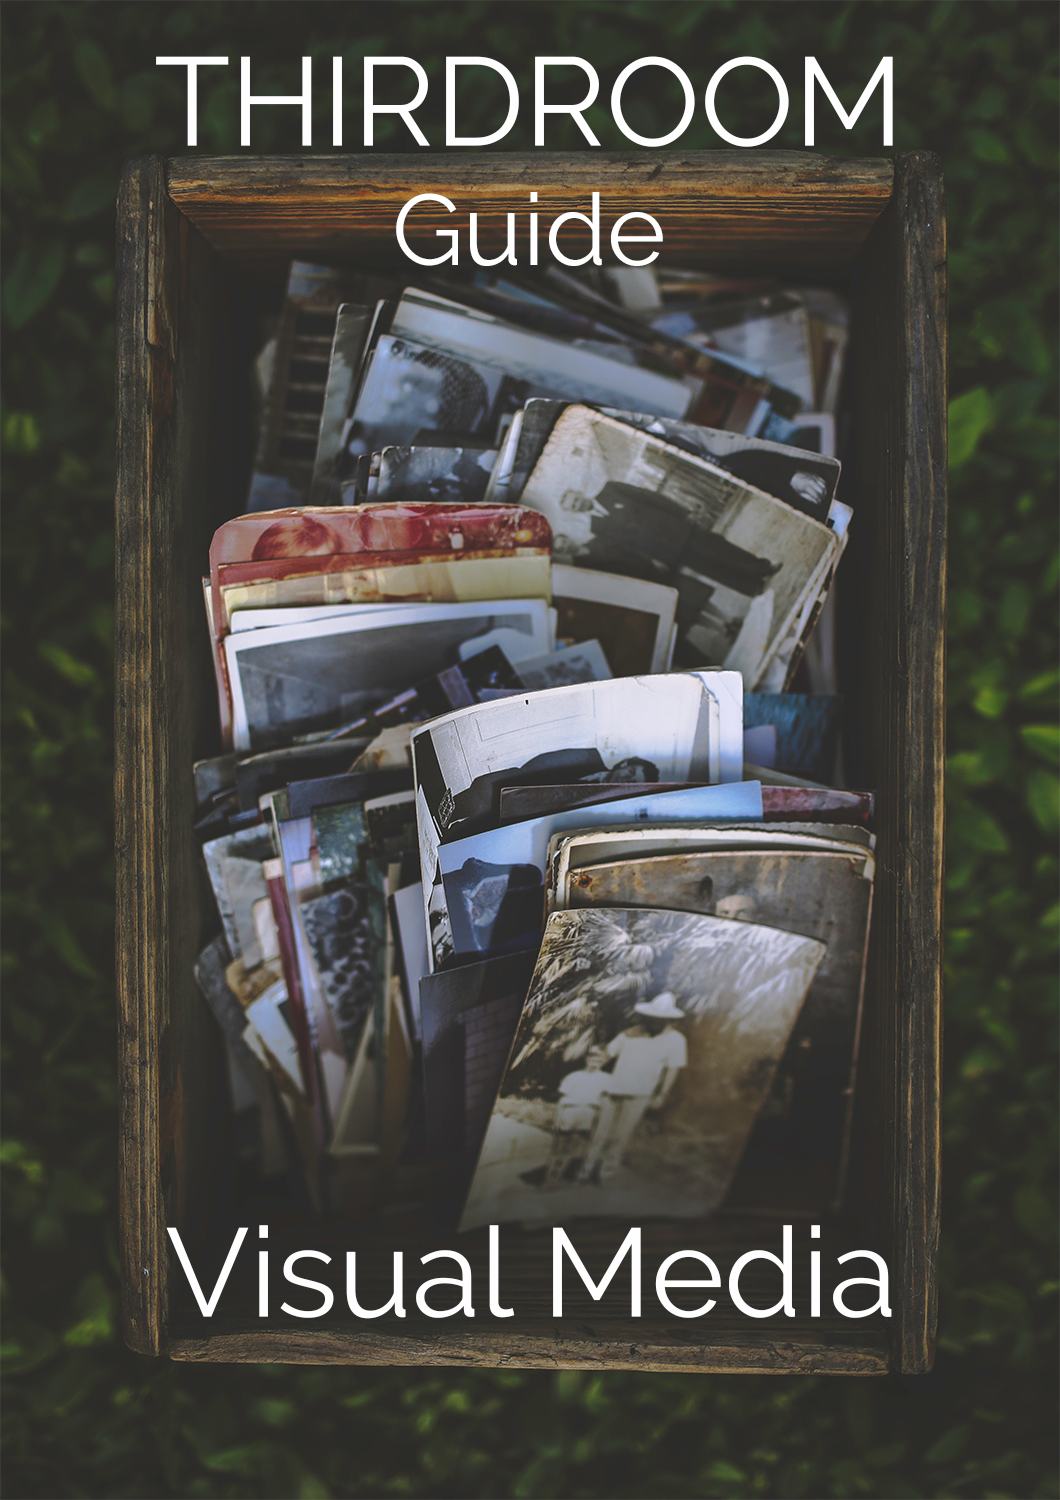 How to: Add visual media on Thirdroom